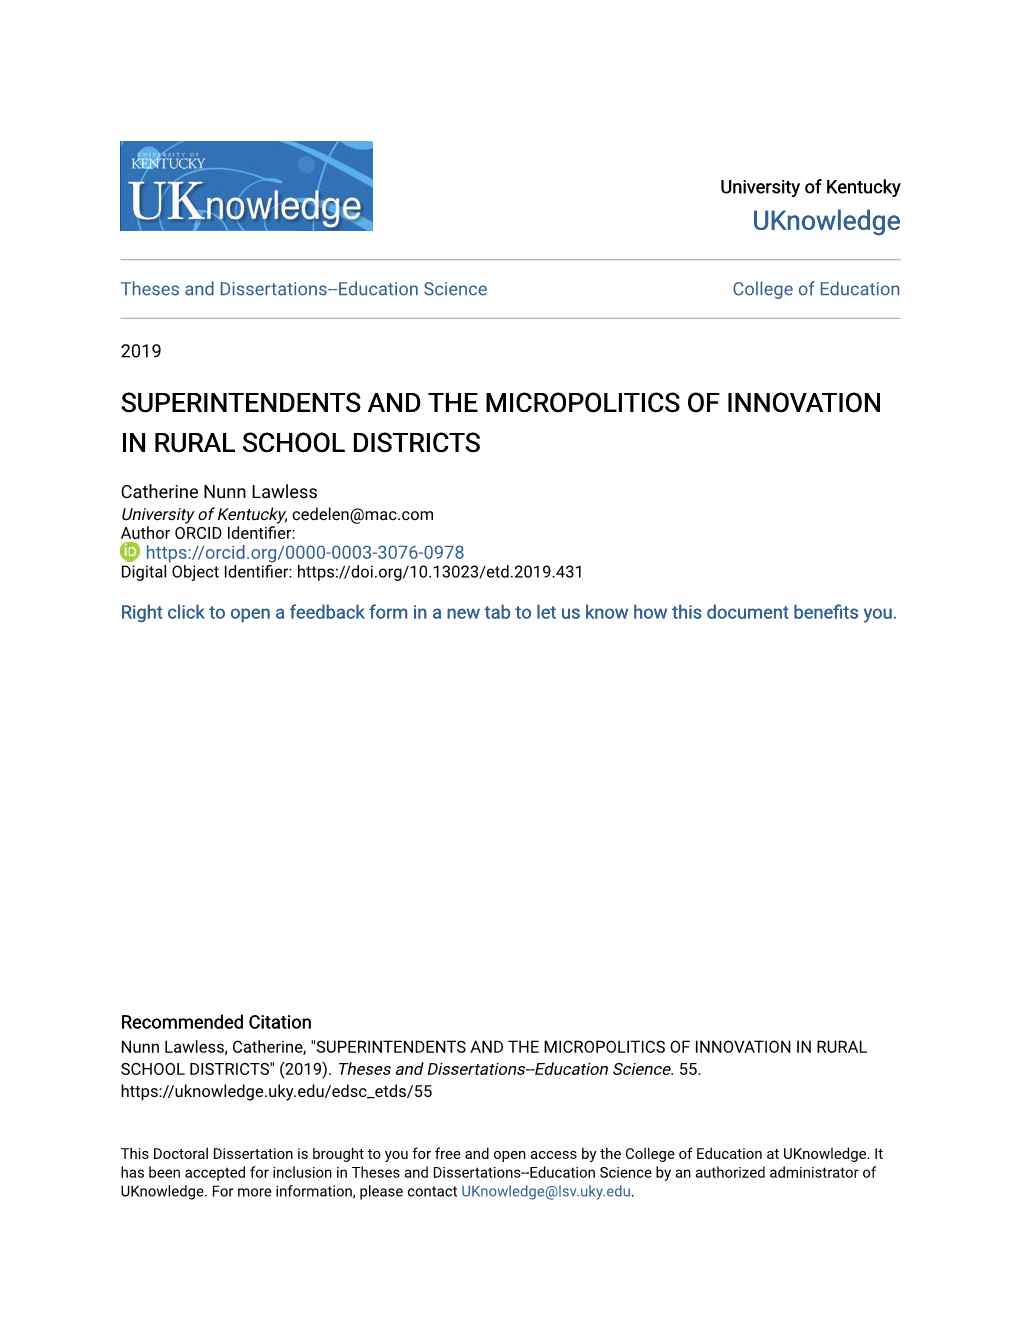 Superintendents and the Micropolitics of Innovation in Rural School Districts